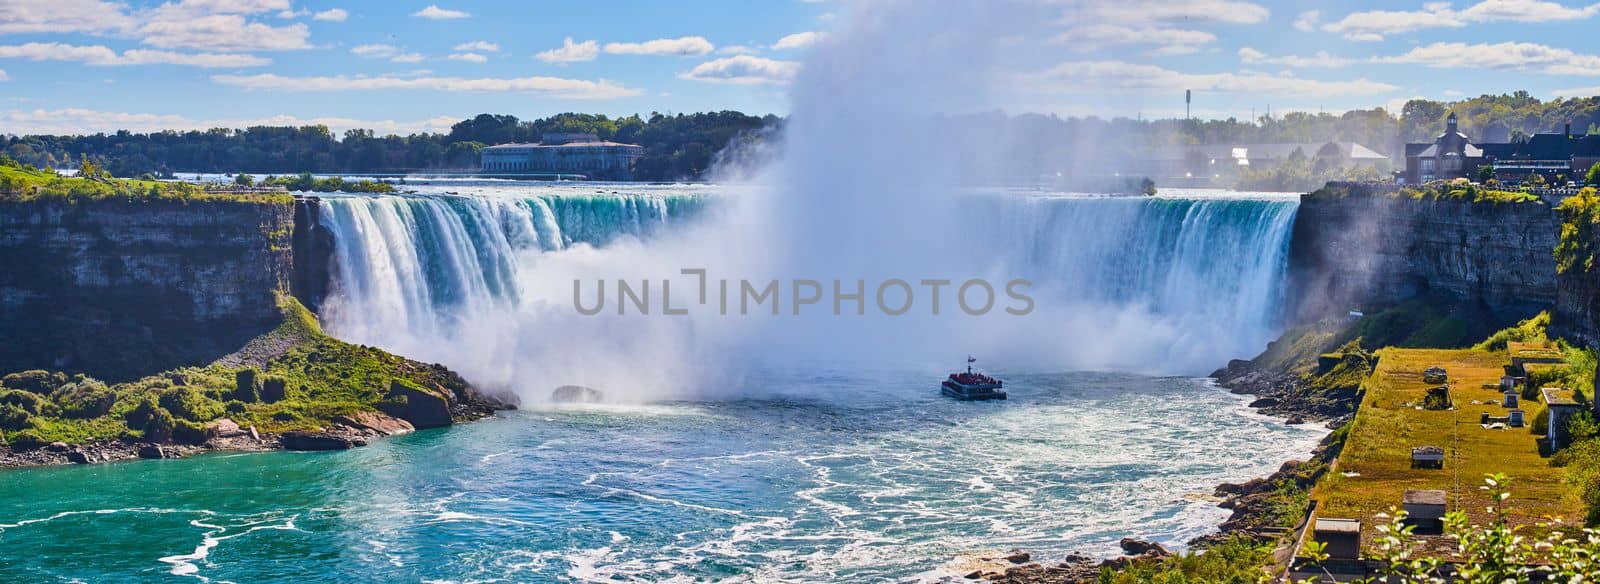 Image of Eye level view of Niagara Falls Horseshoe Falls from Canada with mist surrounded tourist ship